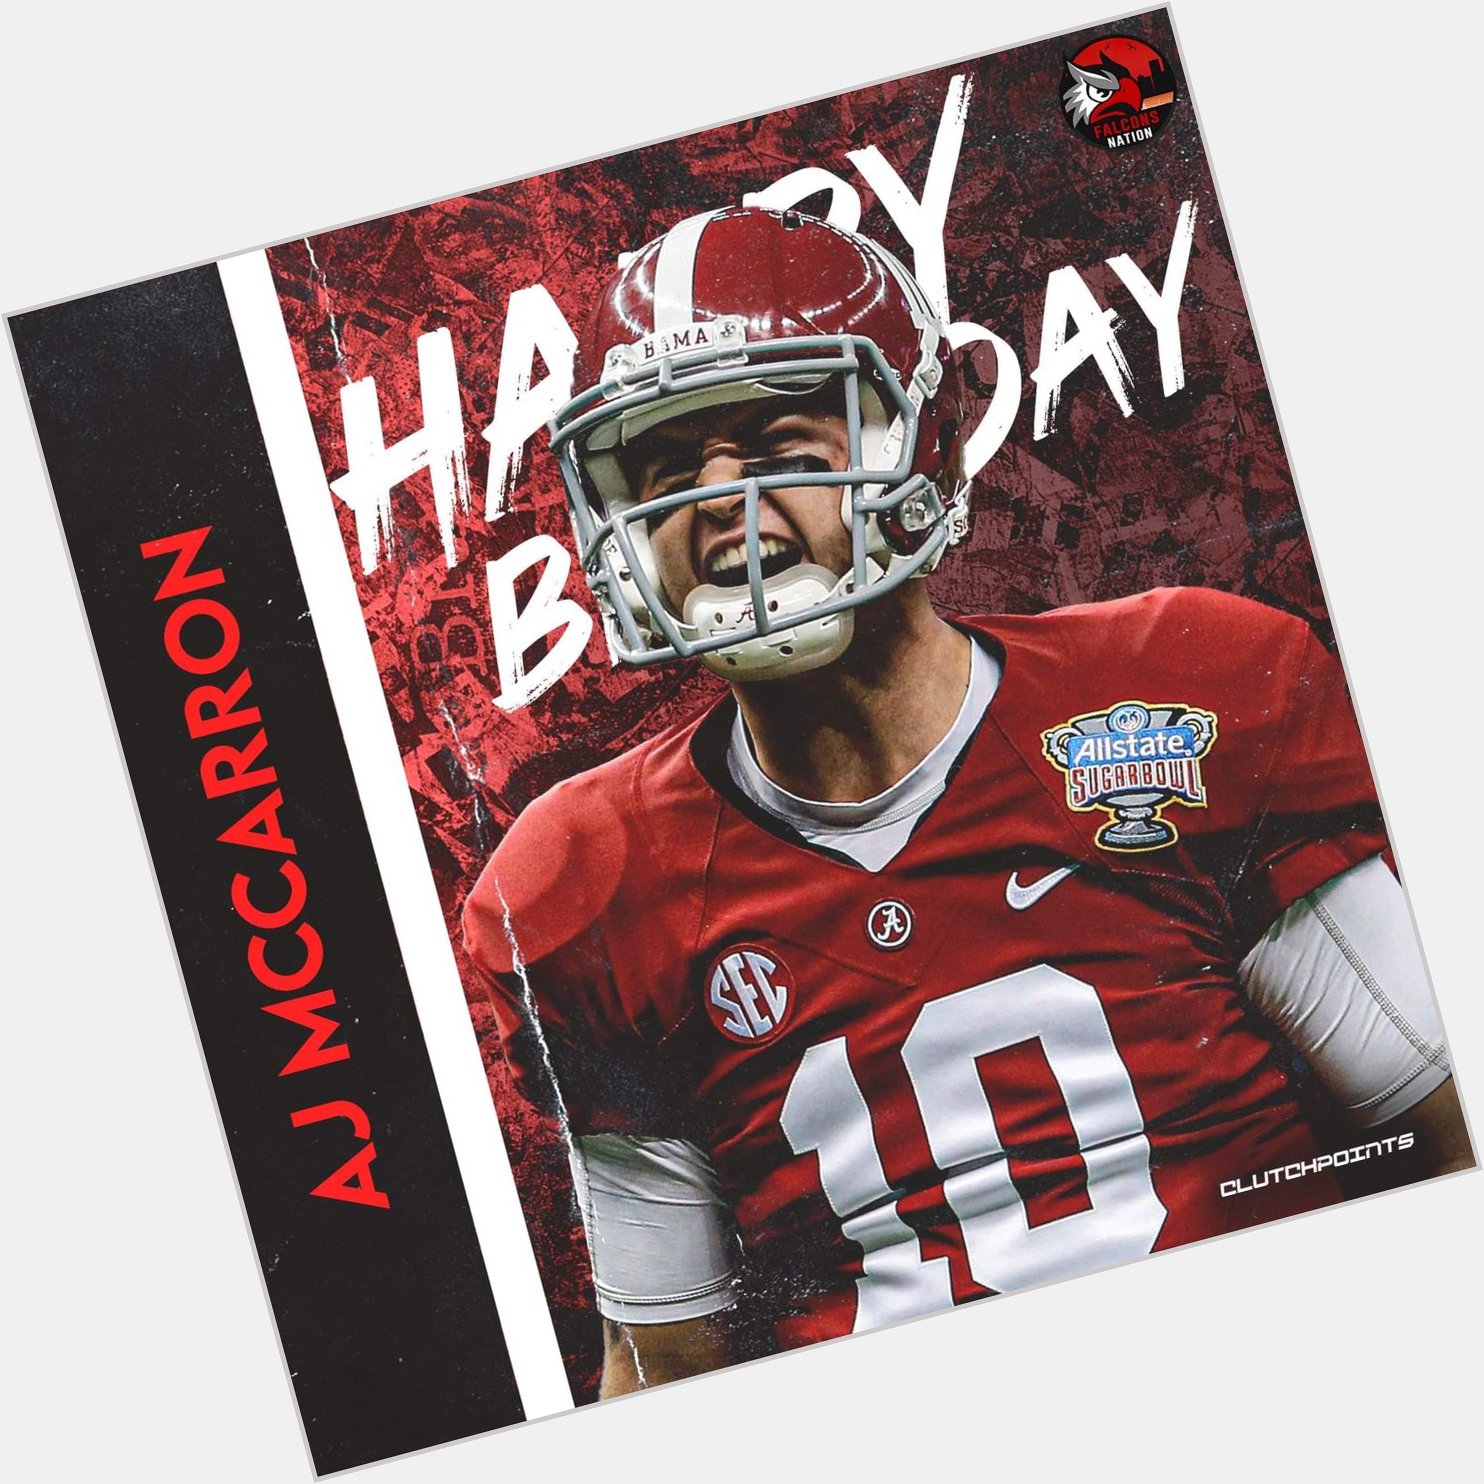 Join Falcons Nation in wishing AJ McCarron a happy 30th birthday!  